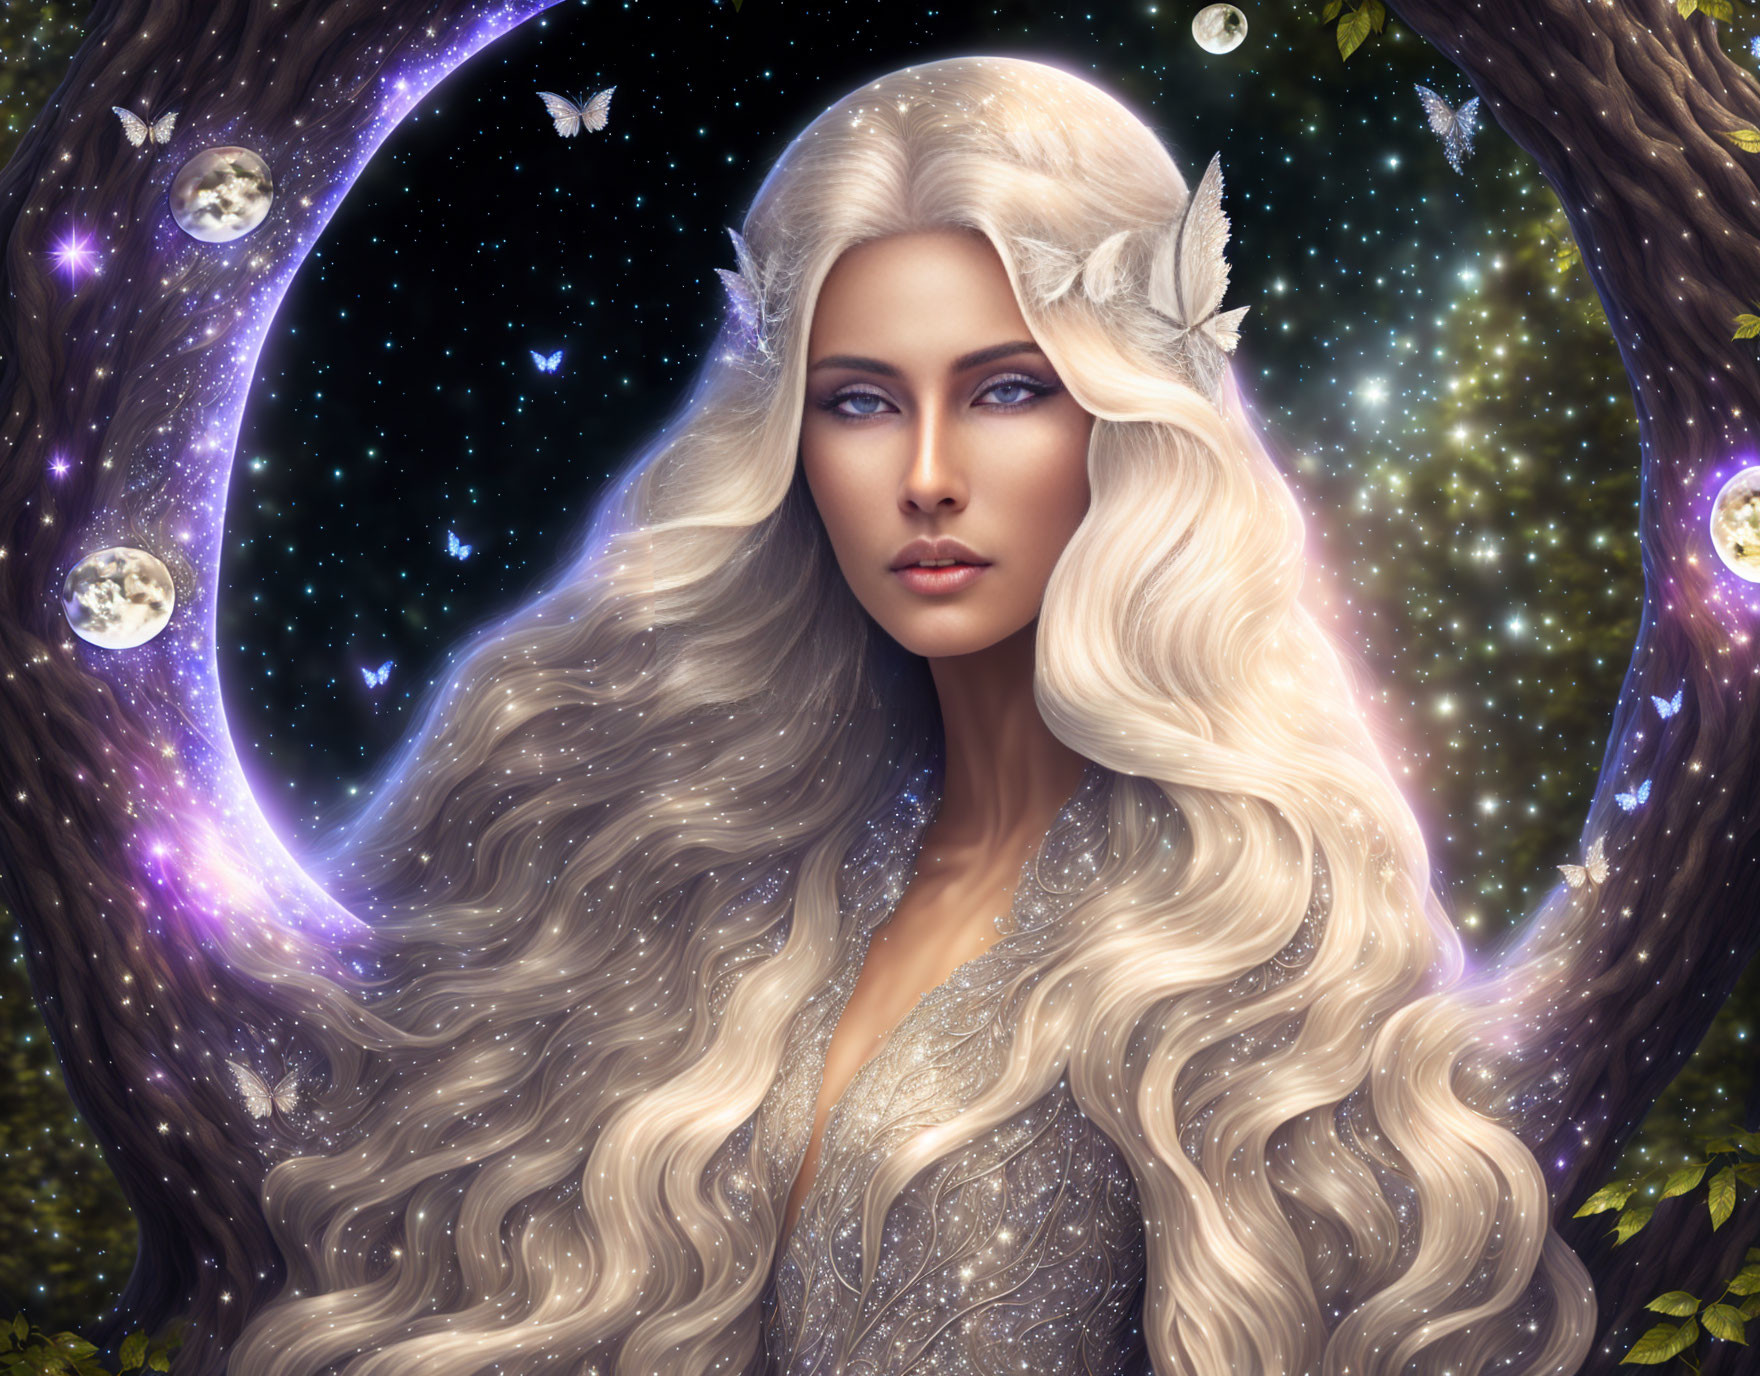 Mystical elf with long wavy hair in cosmic setting with butterflies and moons